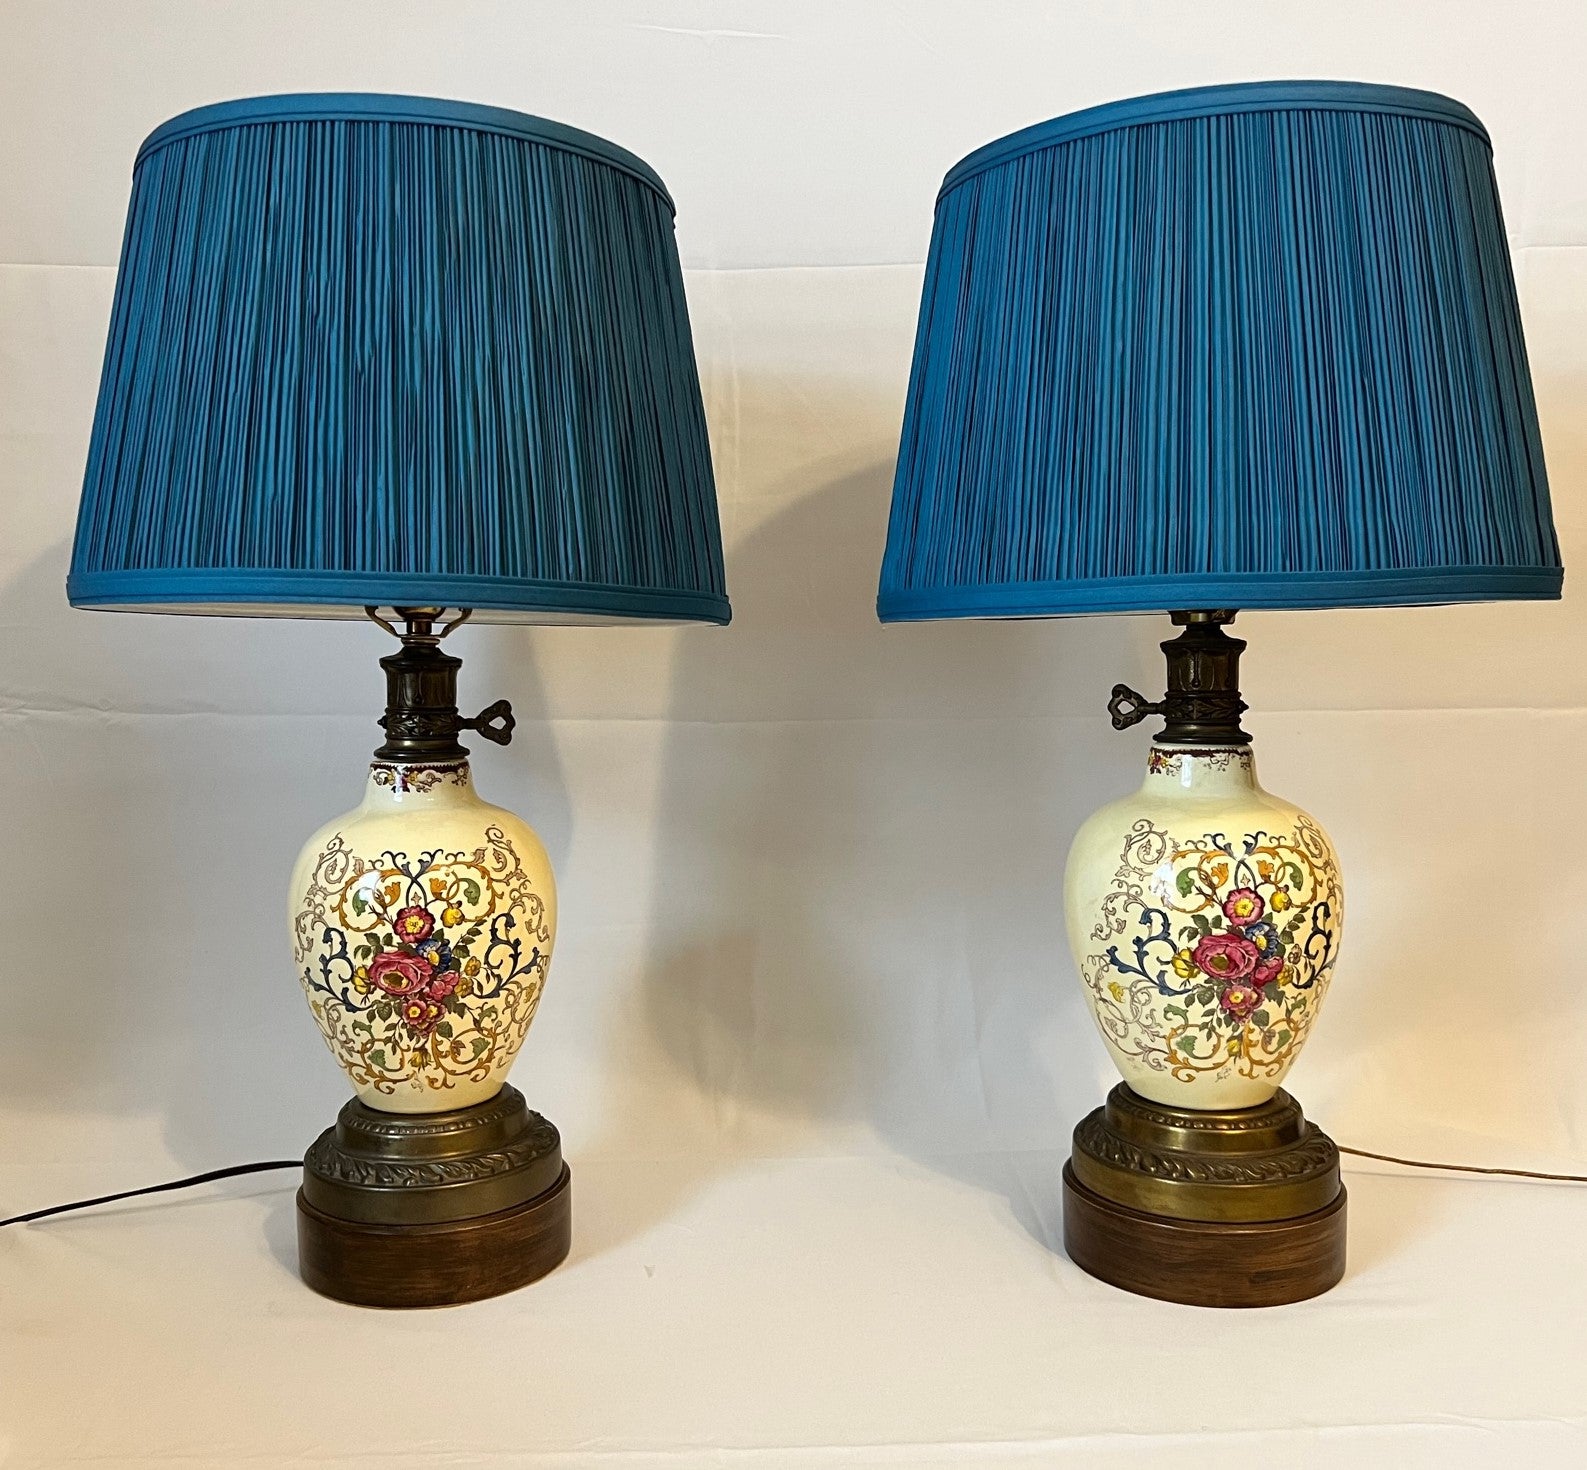 Vintage Ginger Jar Lamps in a Masons Nabob Style, a Pair with New Lamp Shades